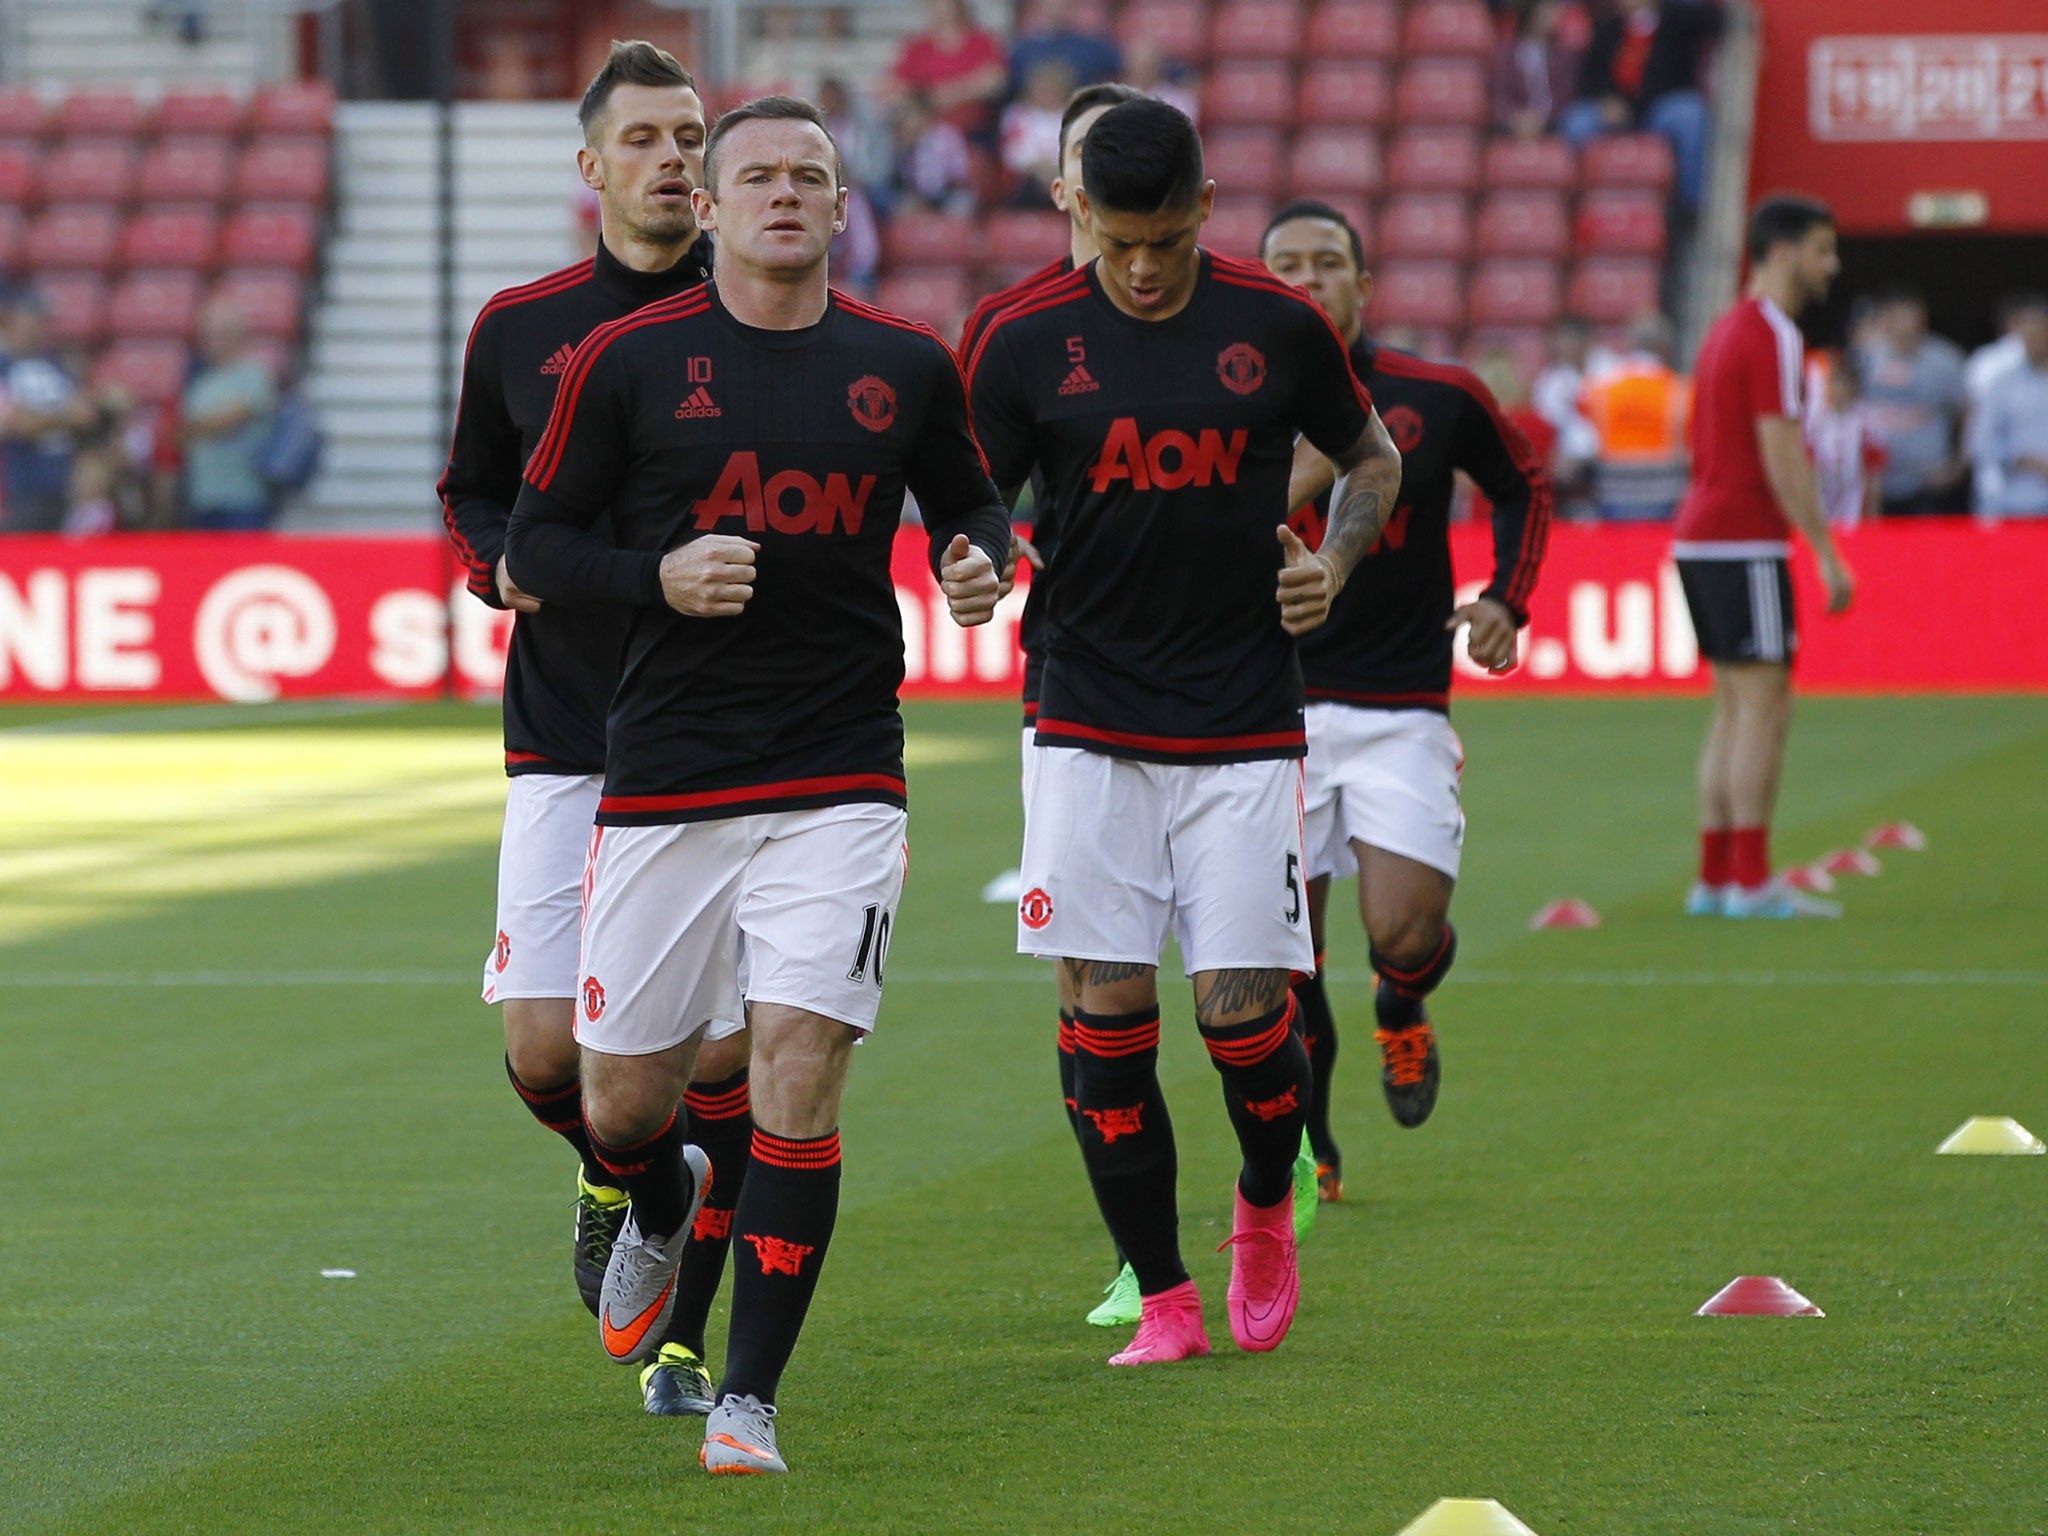 Wayne Rooney warms up ahead of the English Premier League football match between Southampton and Manchester United at St Mary's Stadium in Southampton